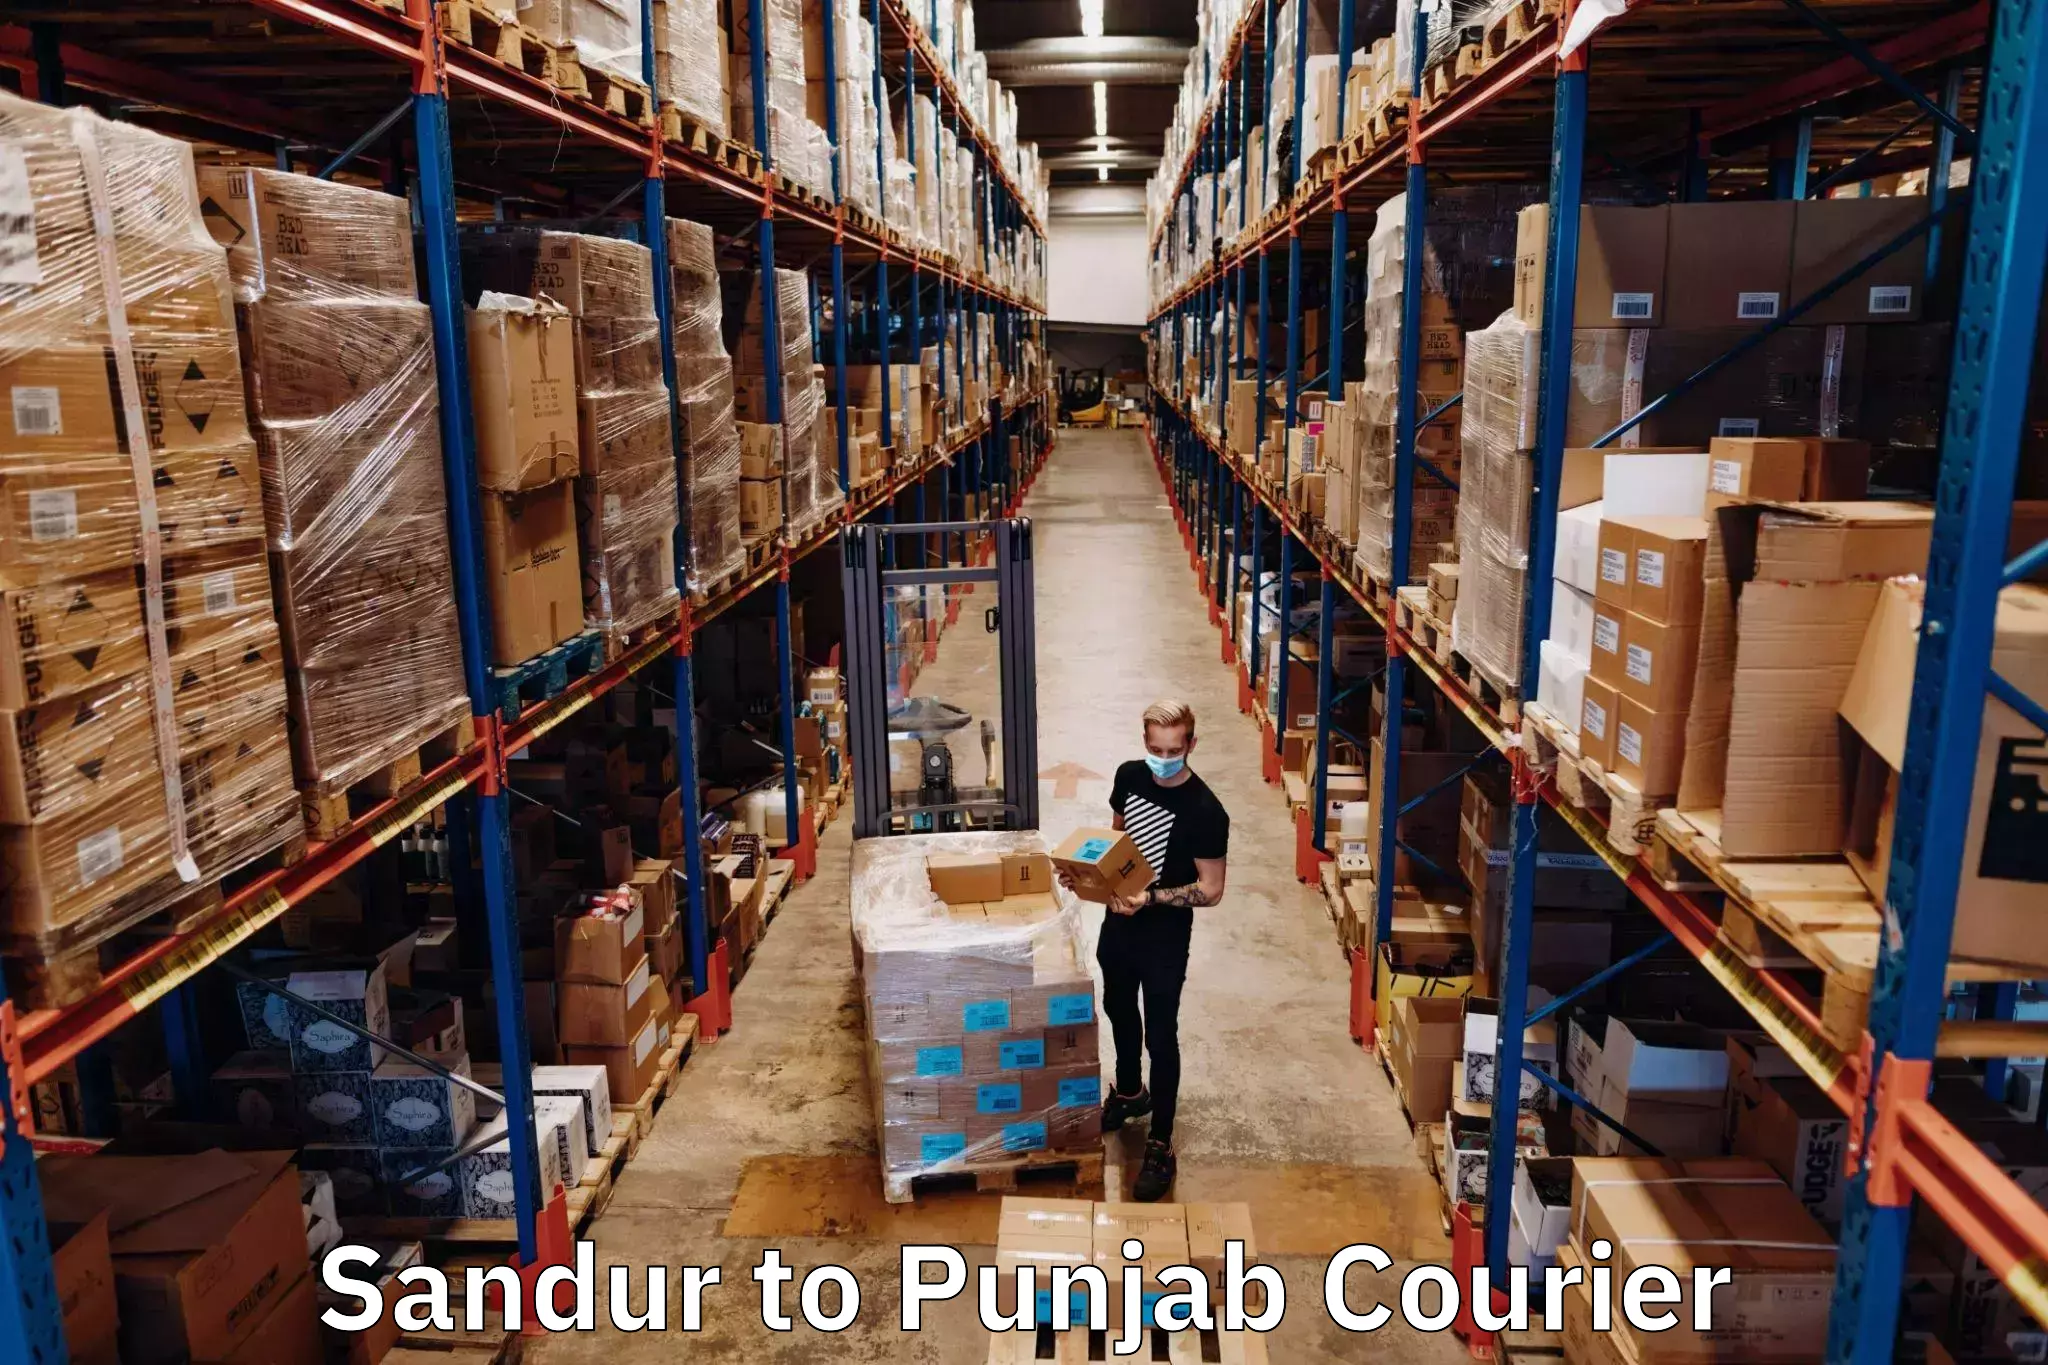 Business delivery service Sandur to Punjab